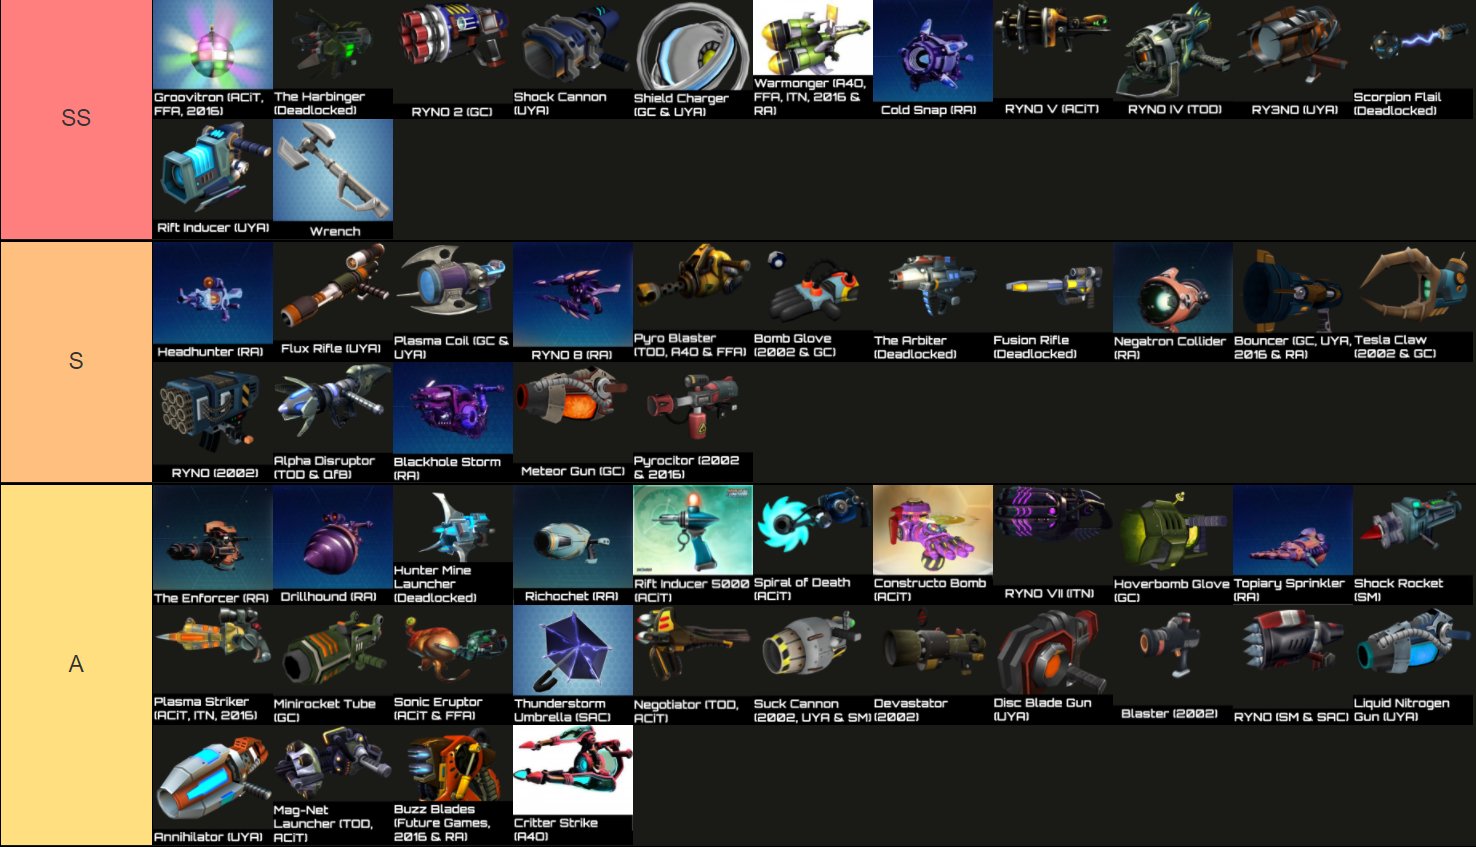 After playing Rift Apart, this would be my tier list of all the